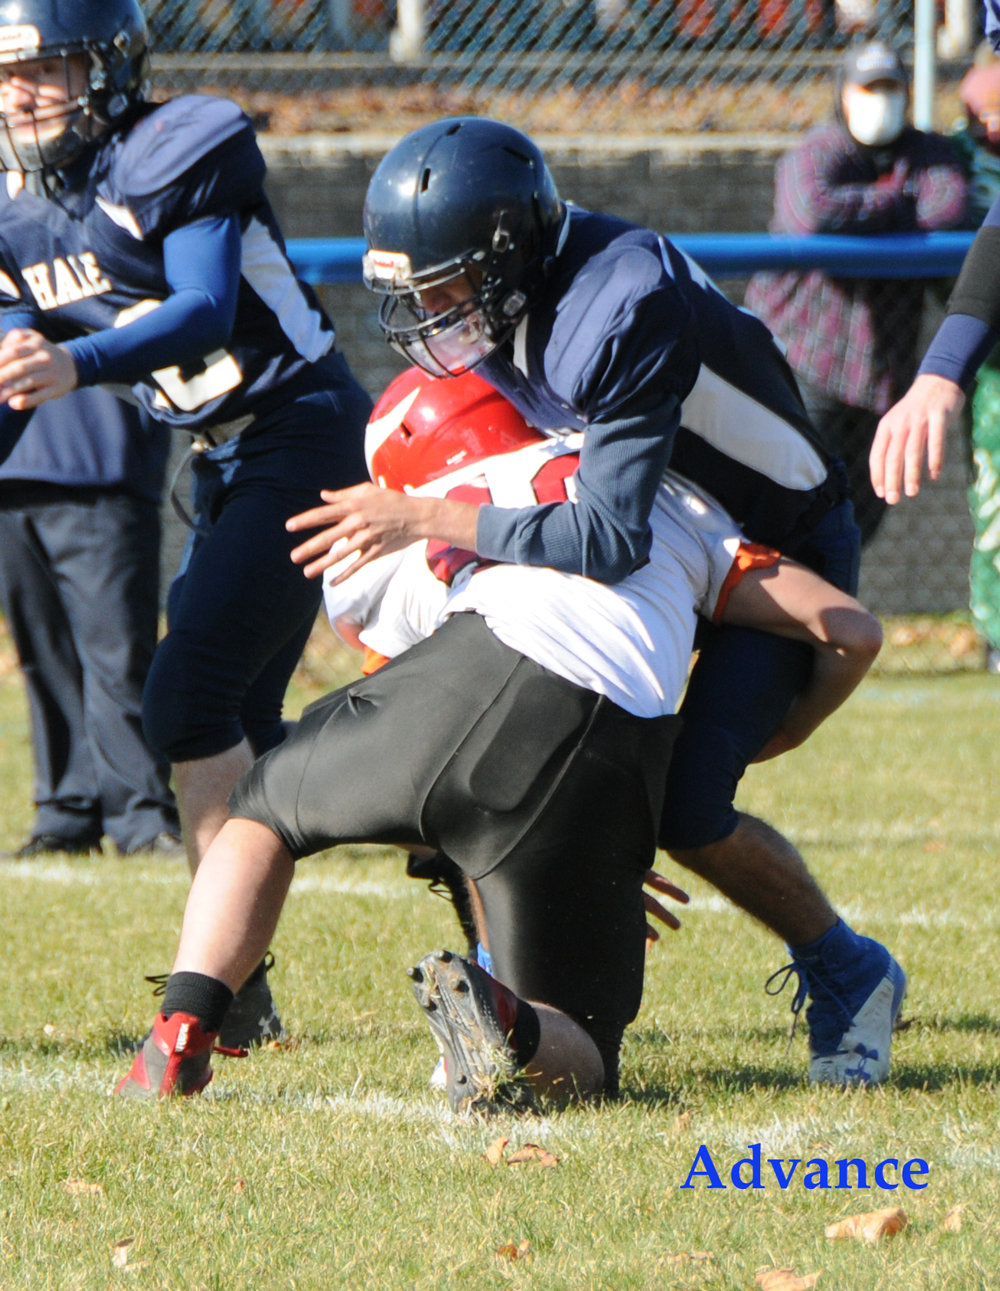 Ben Romel made this tackle stick on a Hale runner. (Photo by Richard Lamb)